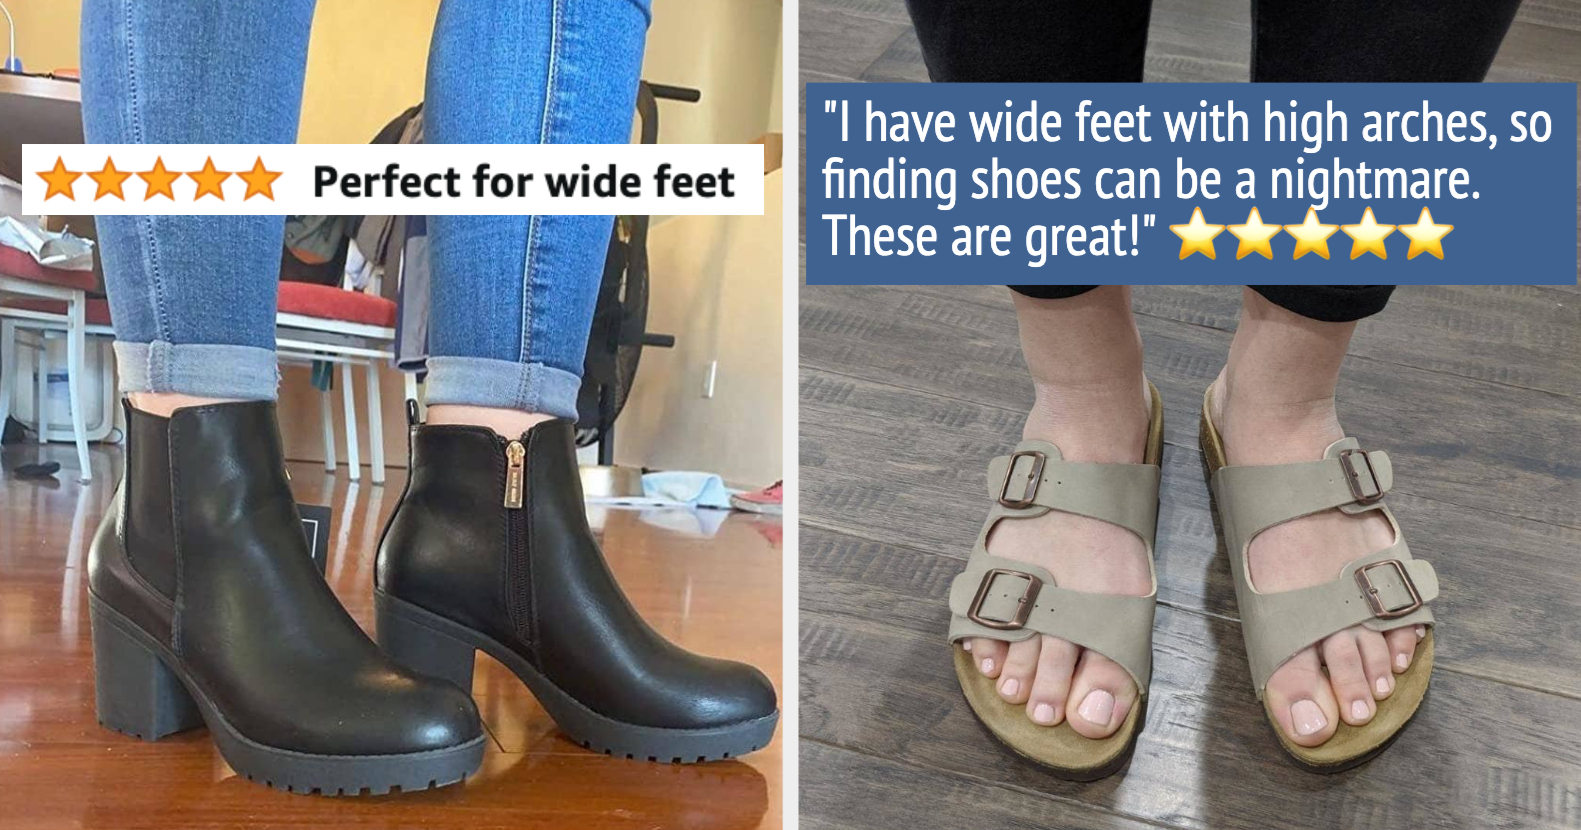 Birkenstocks: Are they good for your feet? A podiatrist weighs in